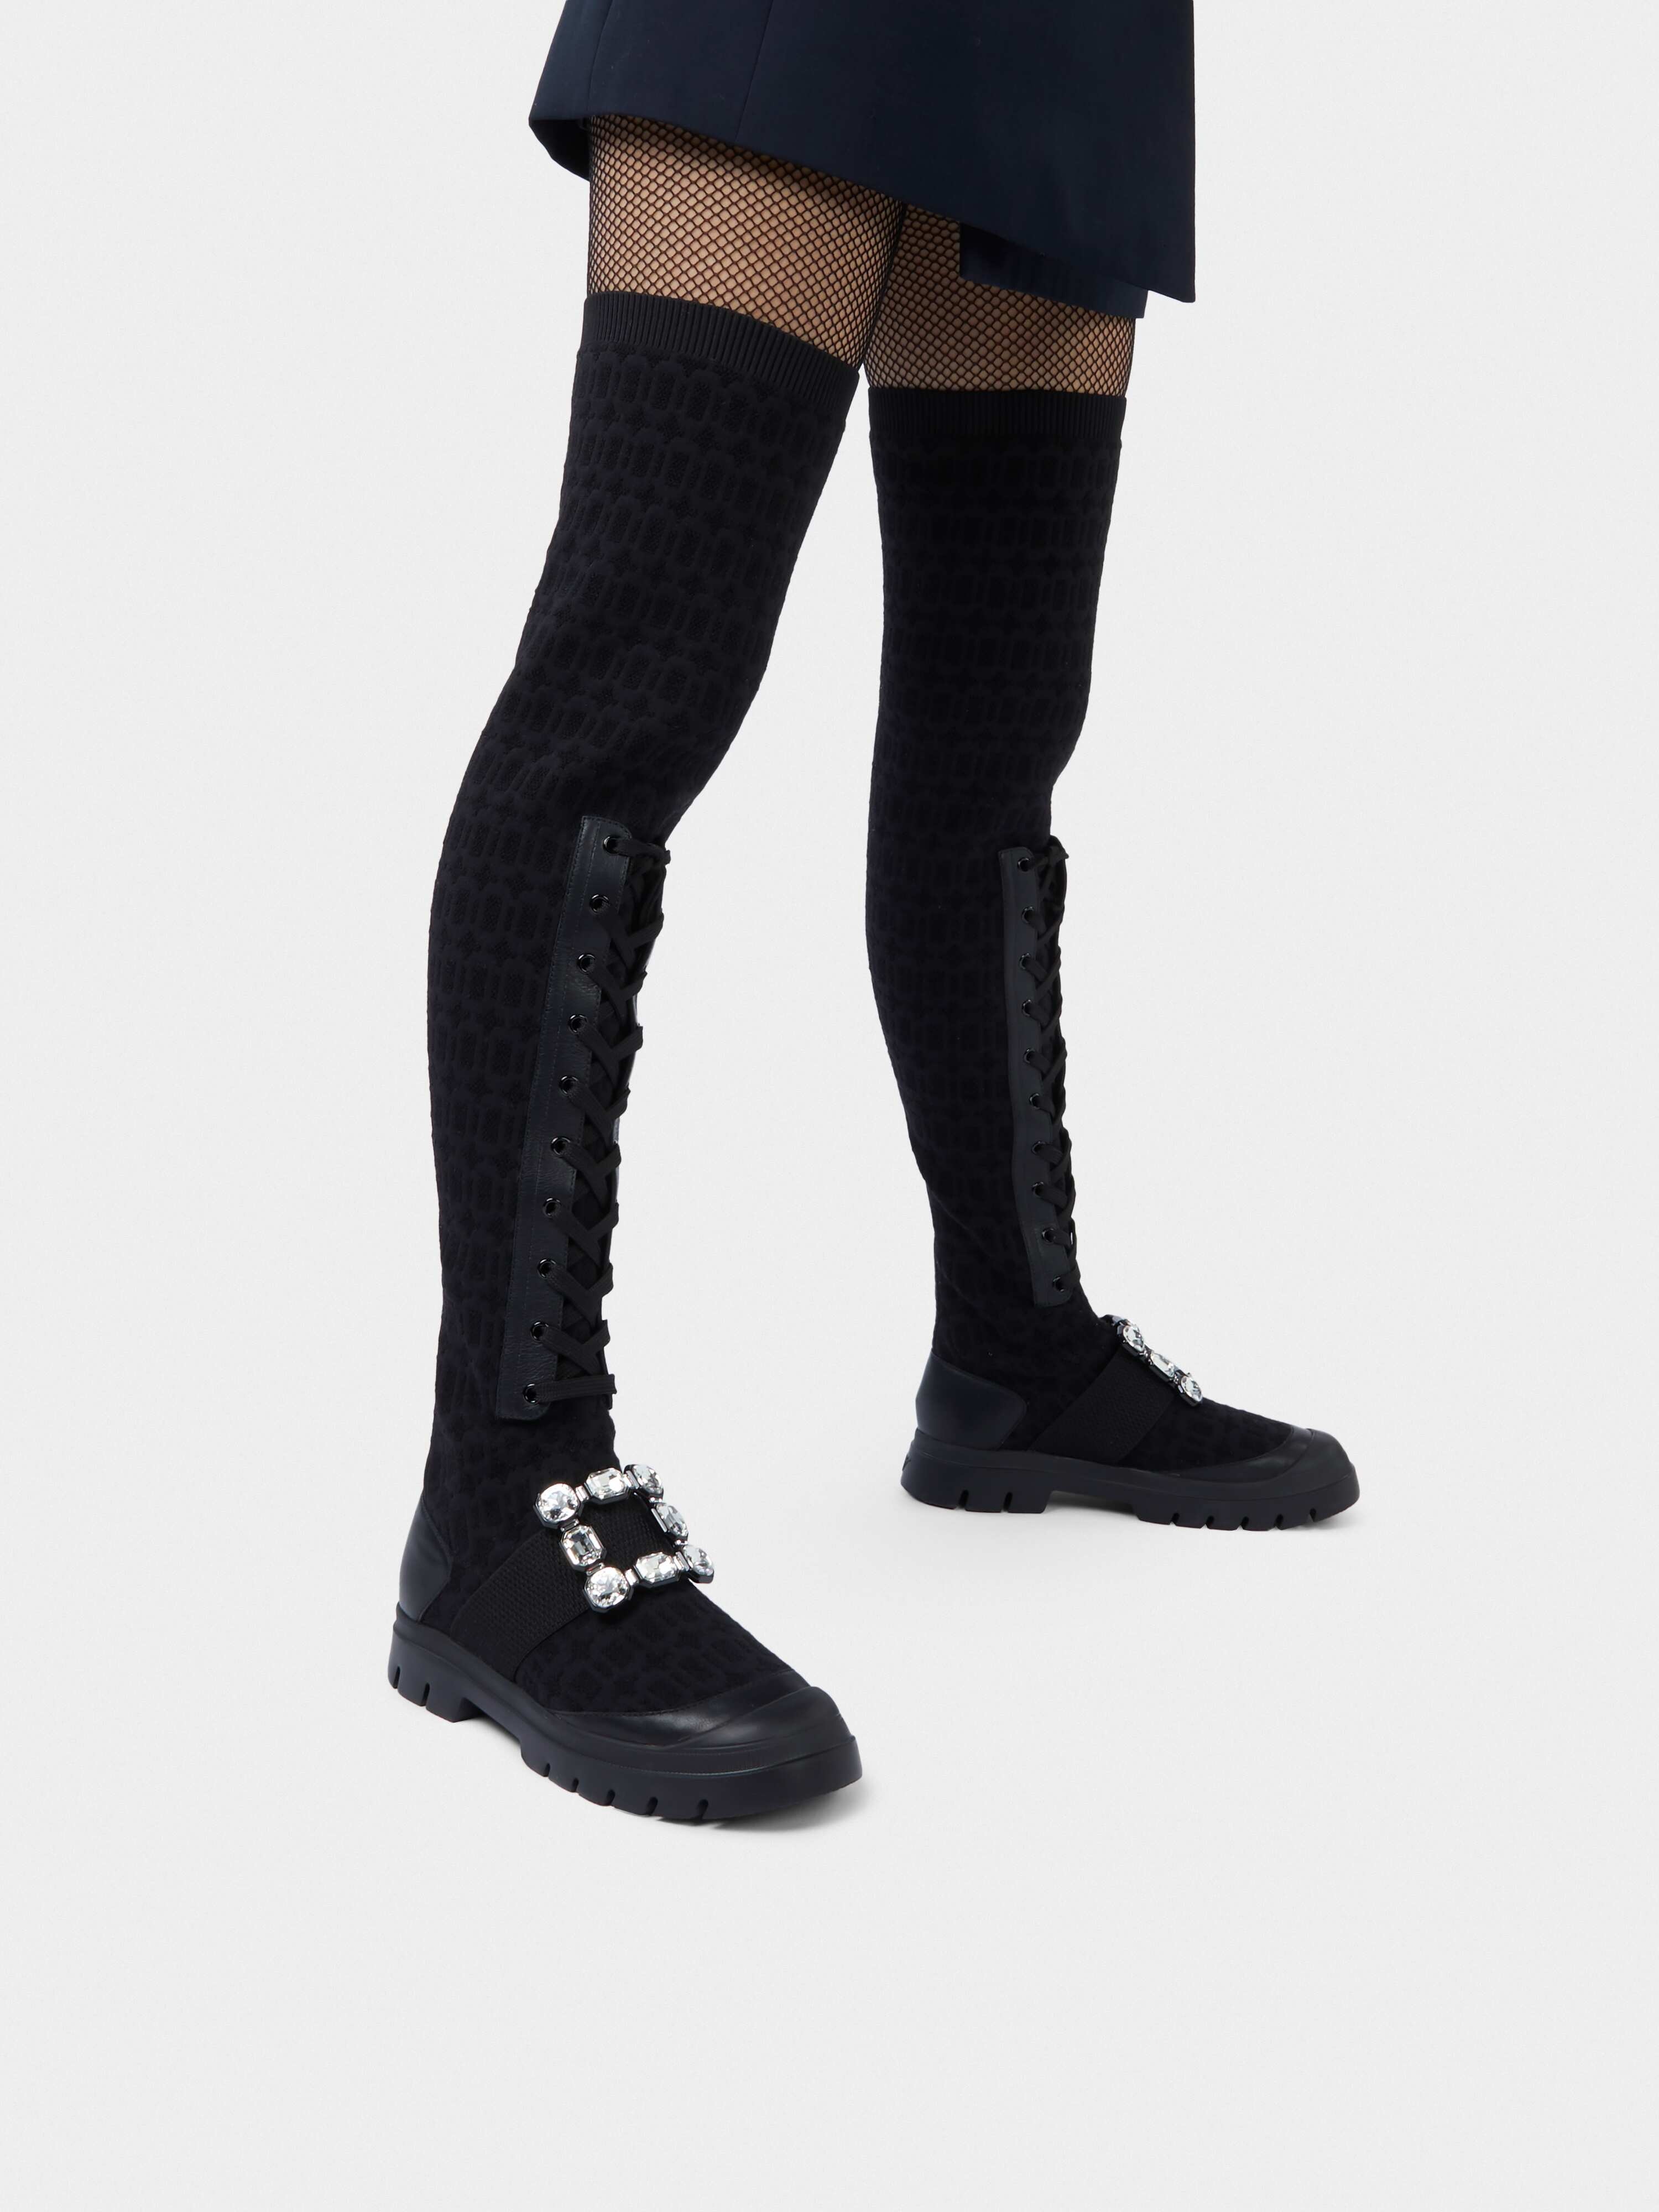 Walky Viv' Strass Buckle Socks Boots in Fabric and Leather - 2